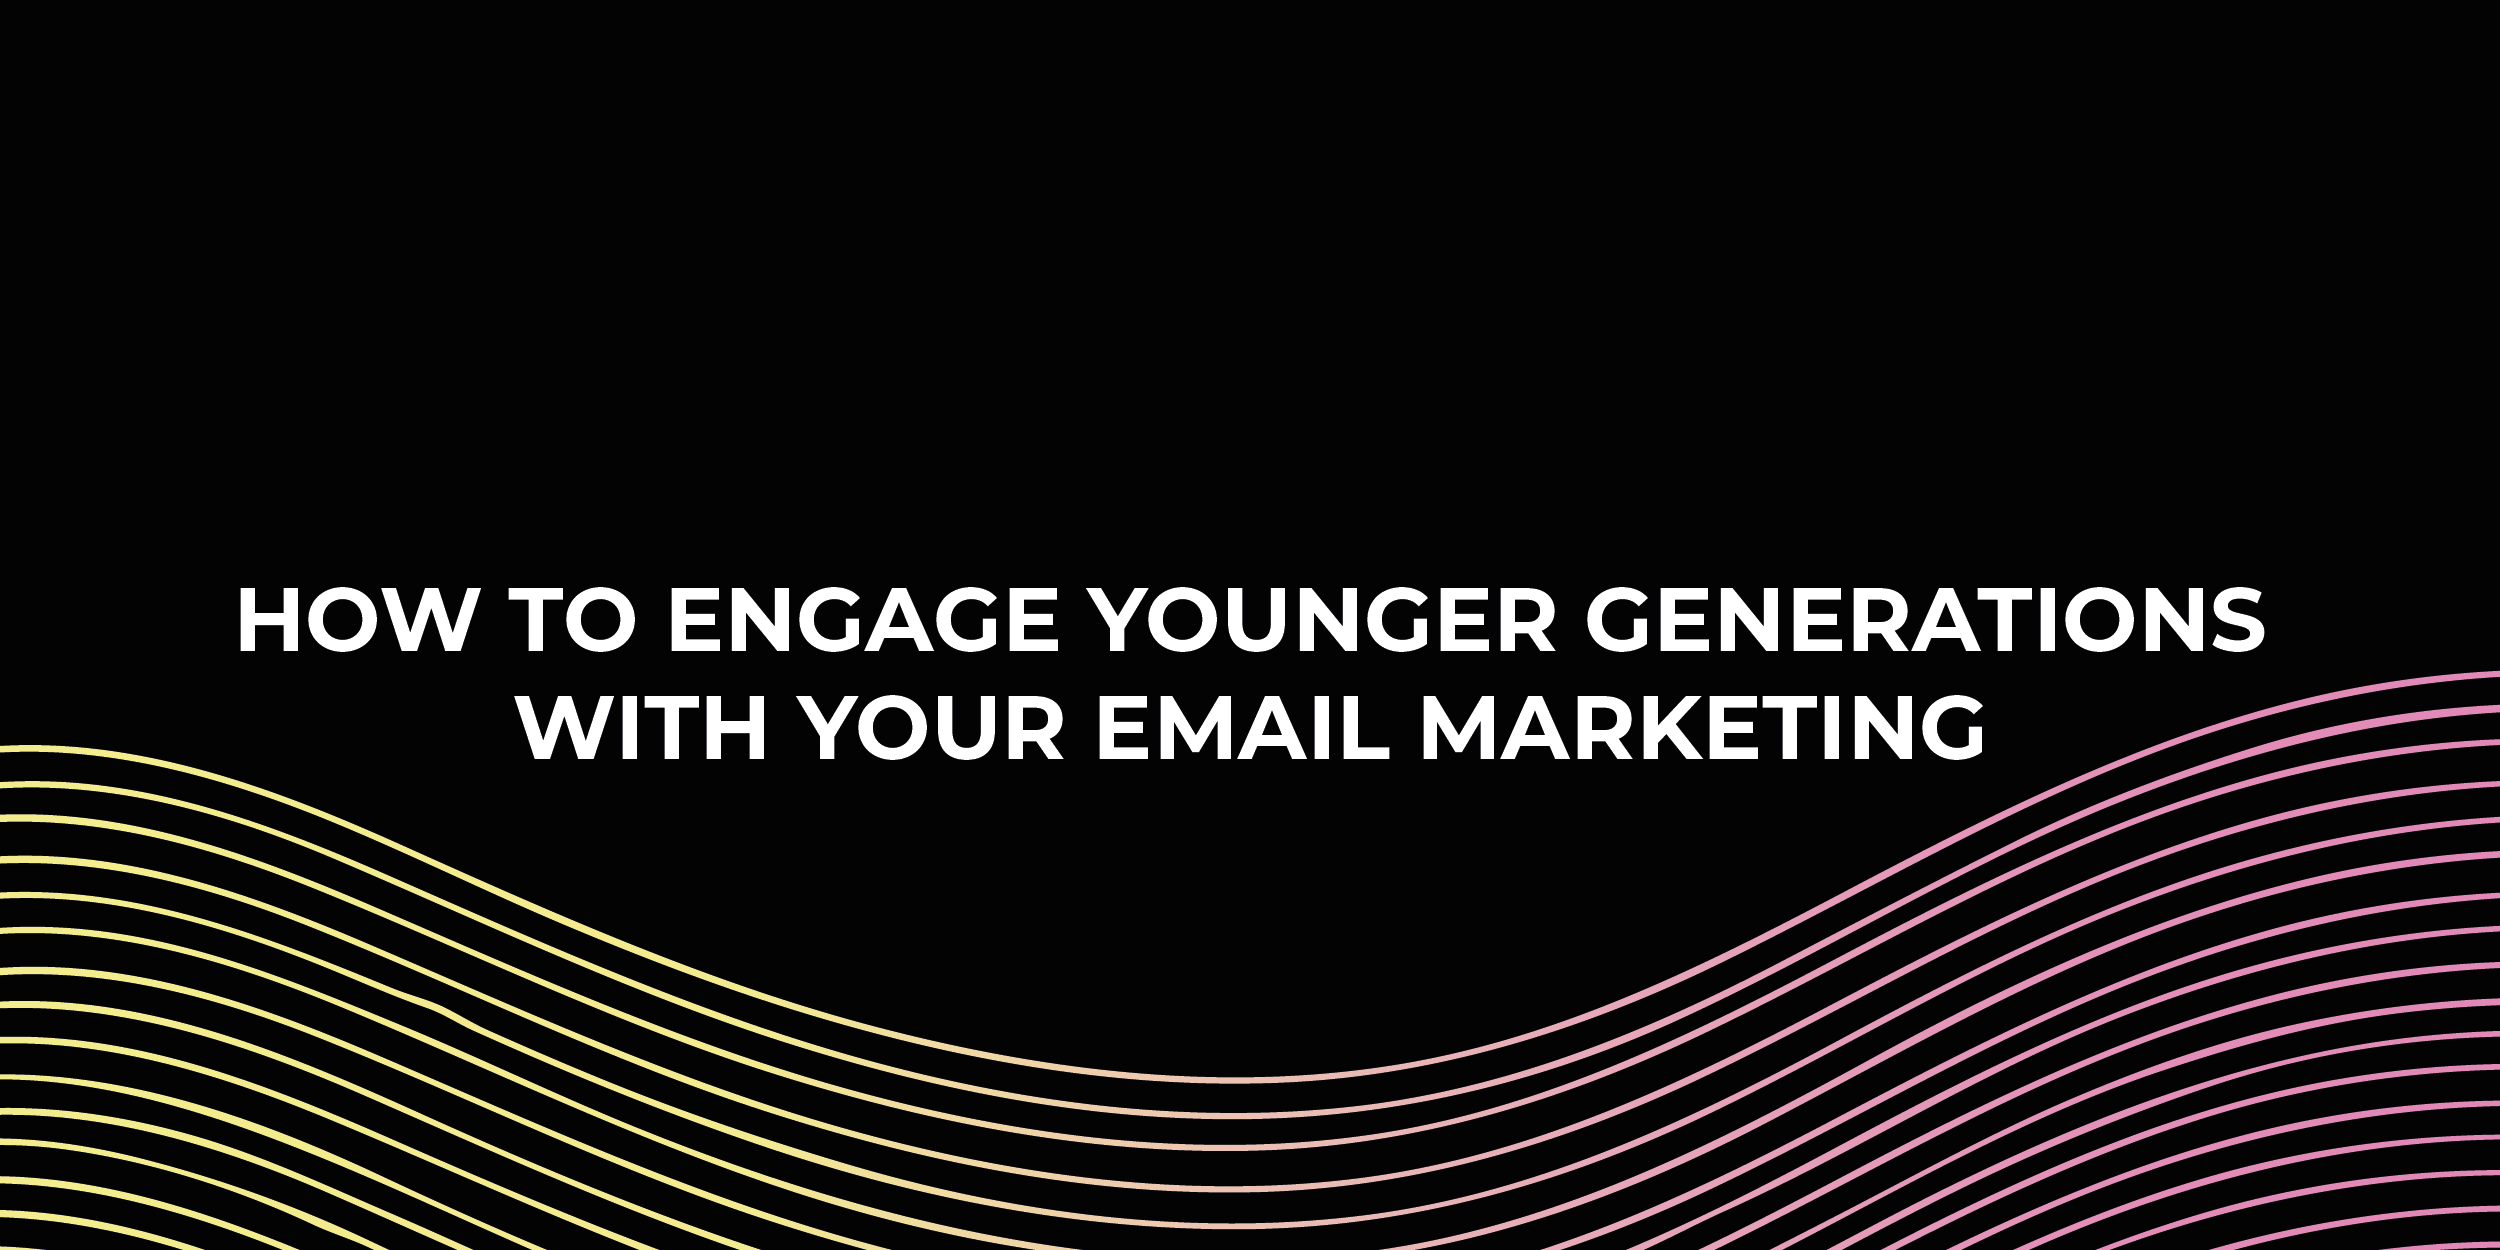 How To Engage Younger Generations With Your Email Marketing